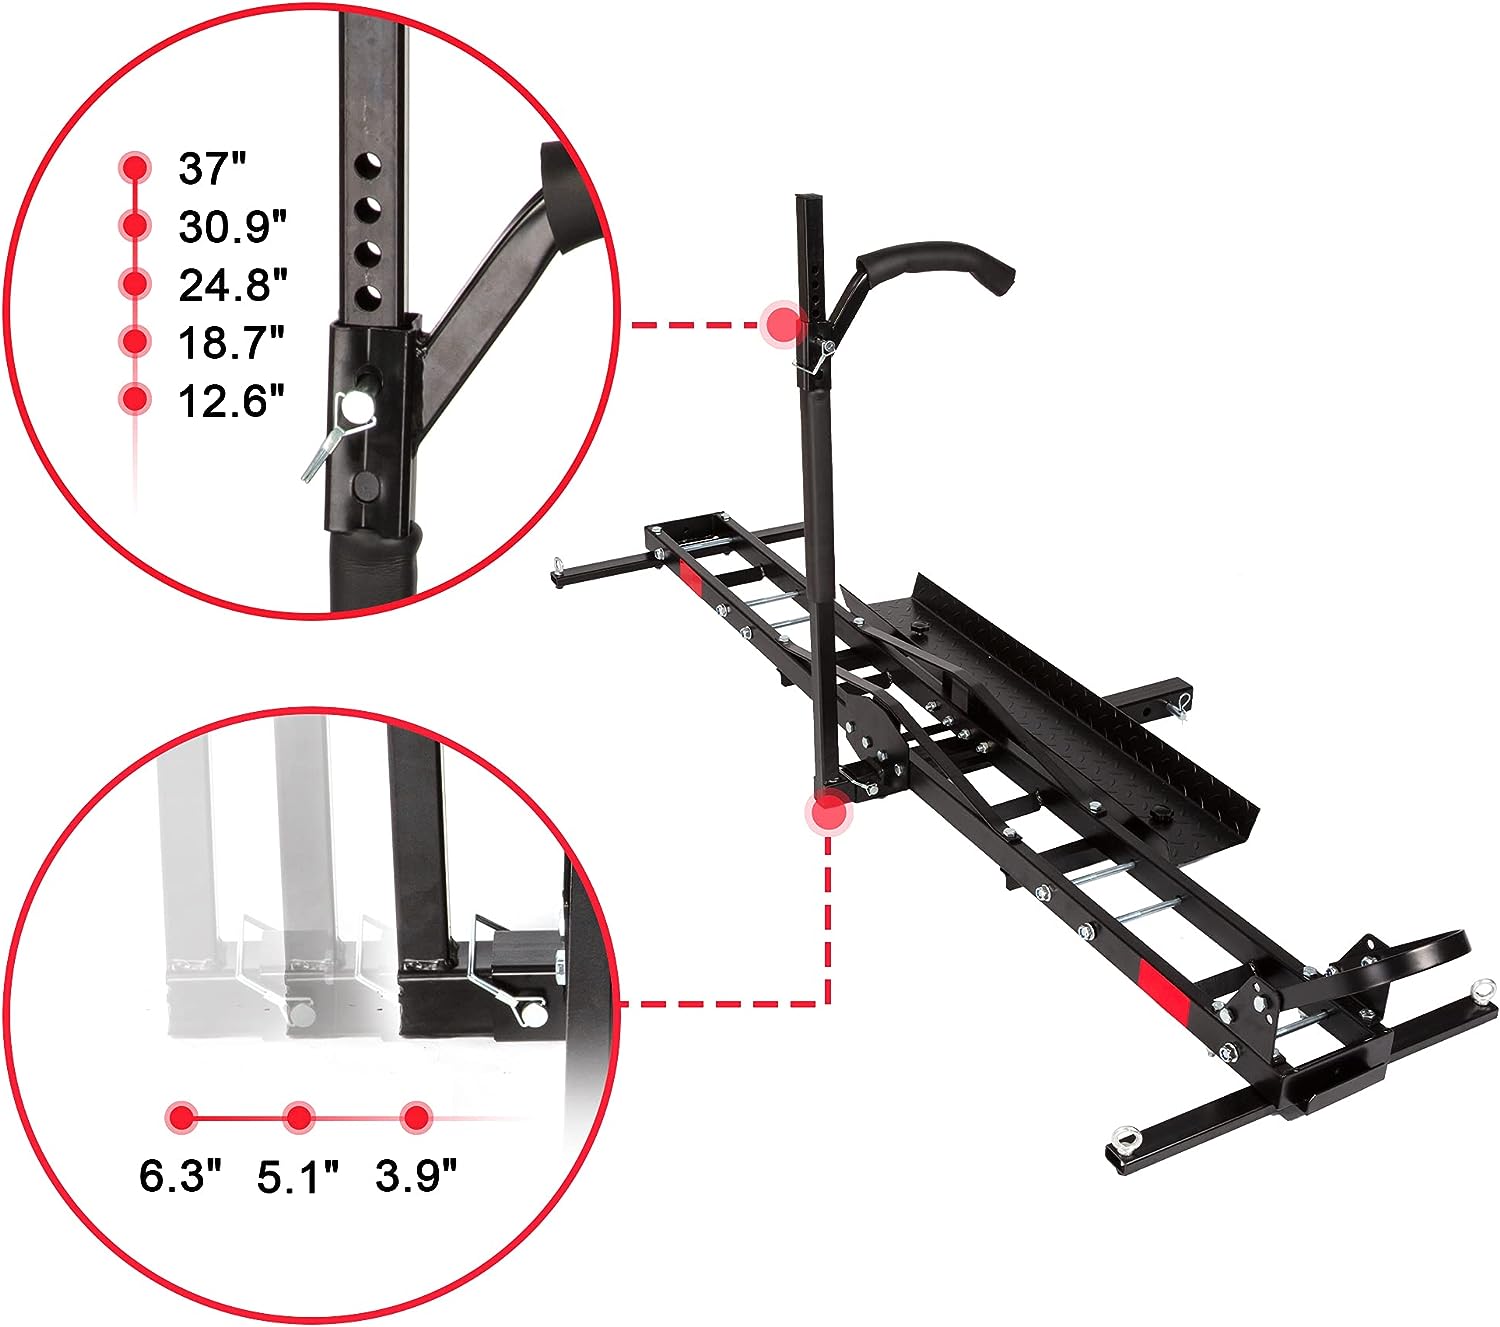 Hitch Mount Dirt Bike Carrier Rack Motorcycle Carrier with Loading Ramp and 2" Hitch Receiver